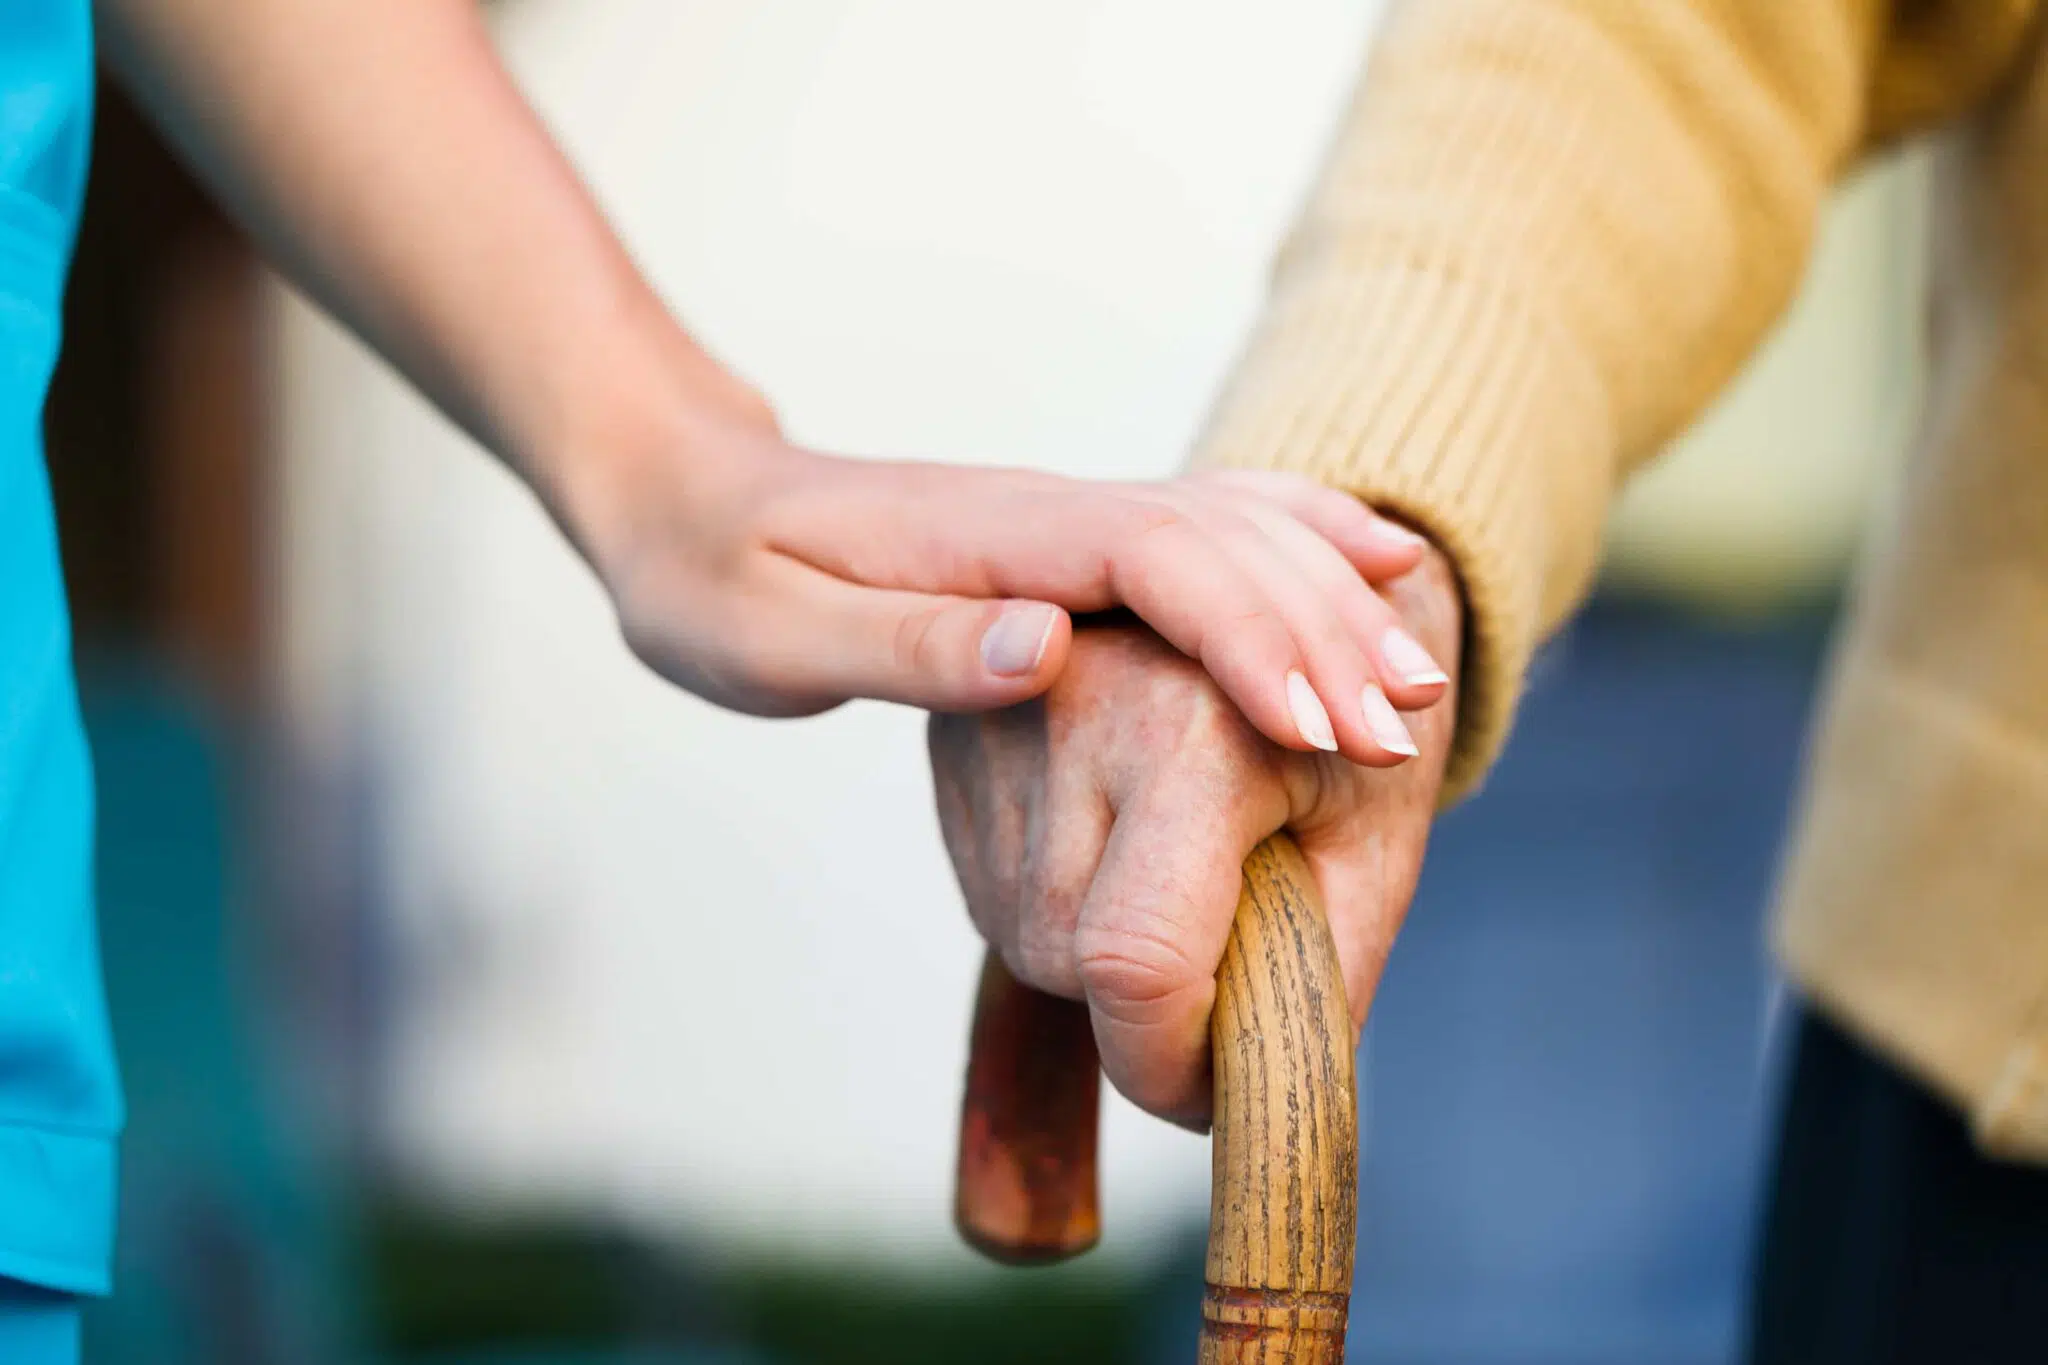 Young person's hand supporting the hand of an older person holding a cane